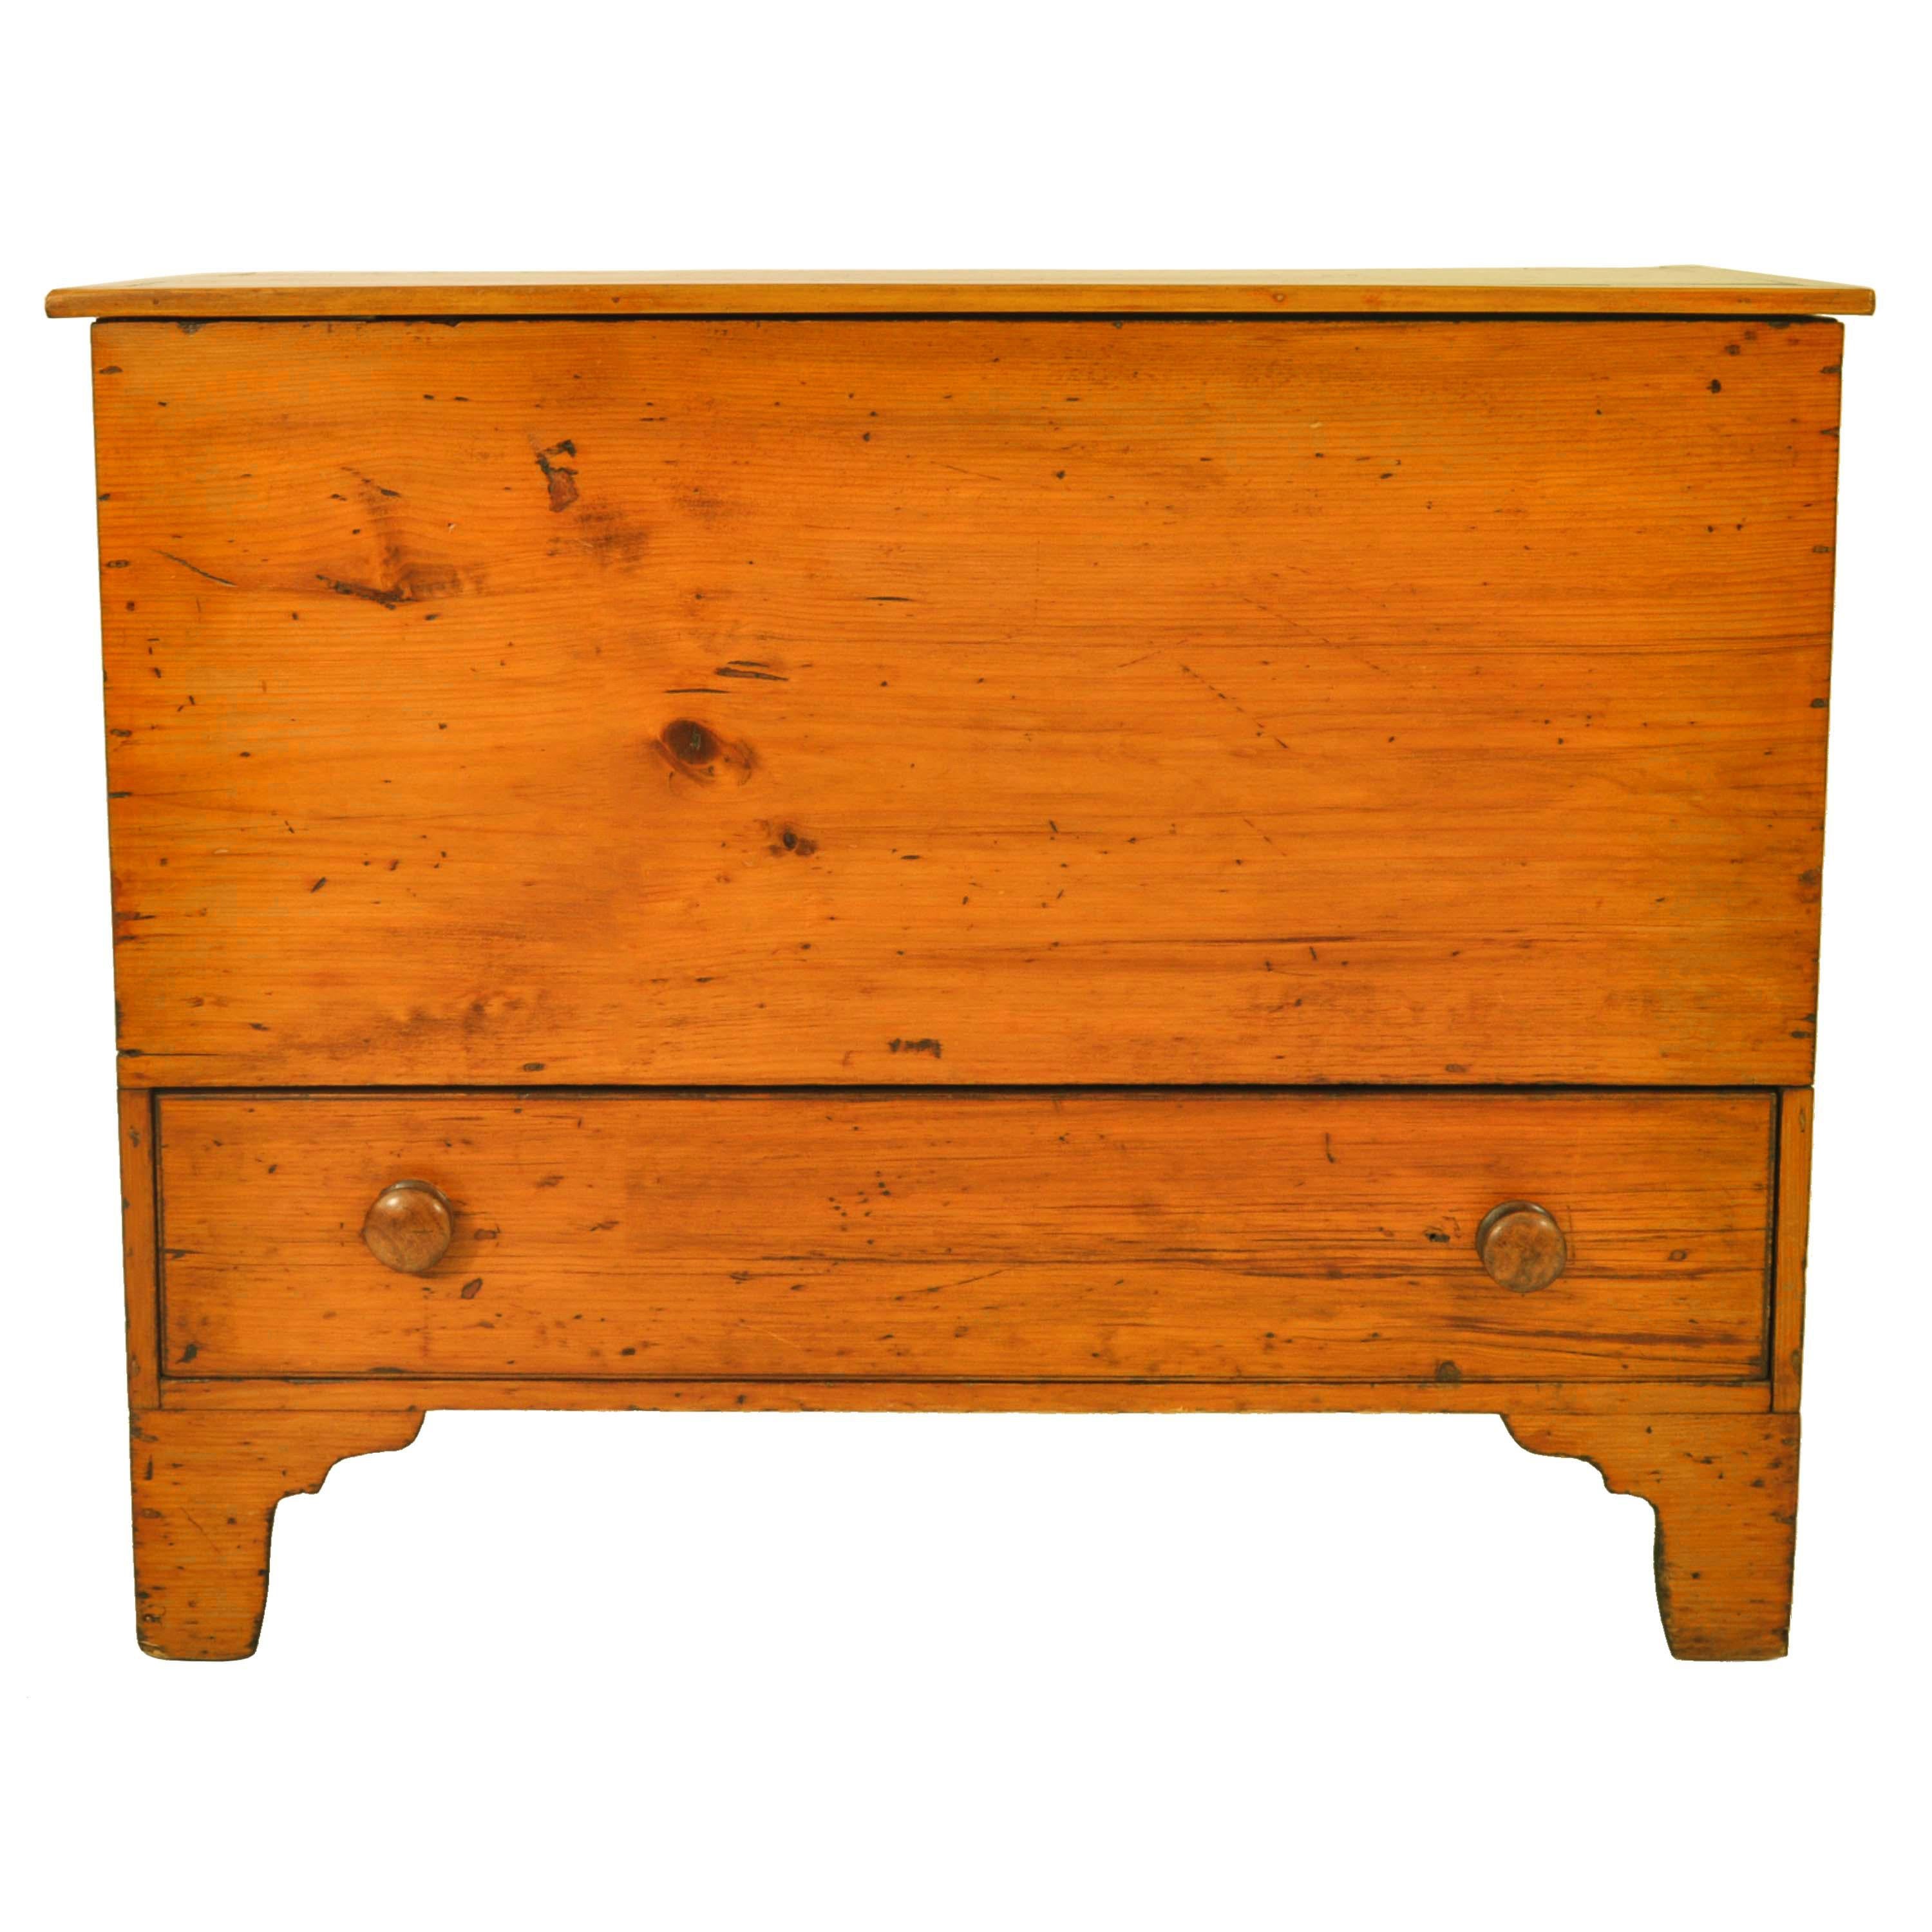 A good antique American Country Chippendale 'pumpkin' pine blanet box/mule chest, New England, circa 1790.
The hinged lid revealing a storage area with a lidded till to the left, the base having a single long drawer with bun shaped pulls, the chest